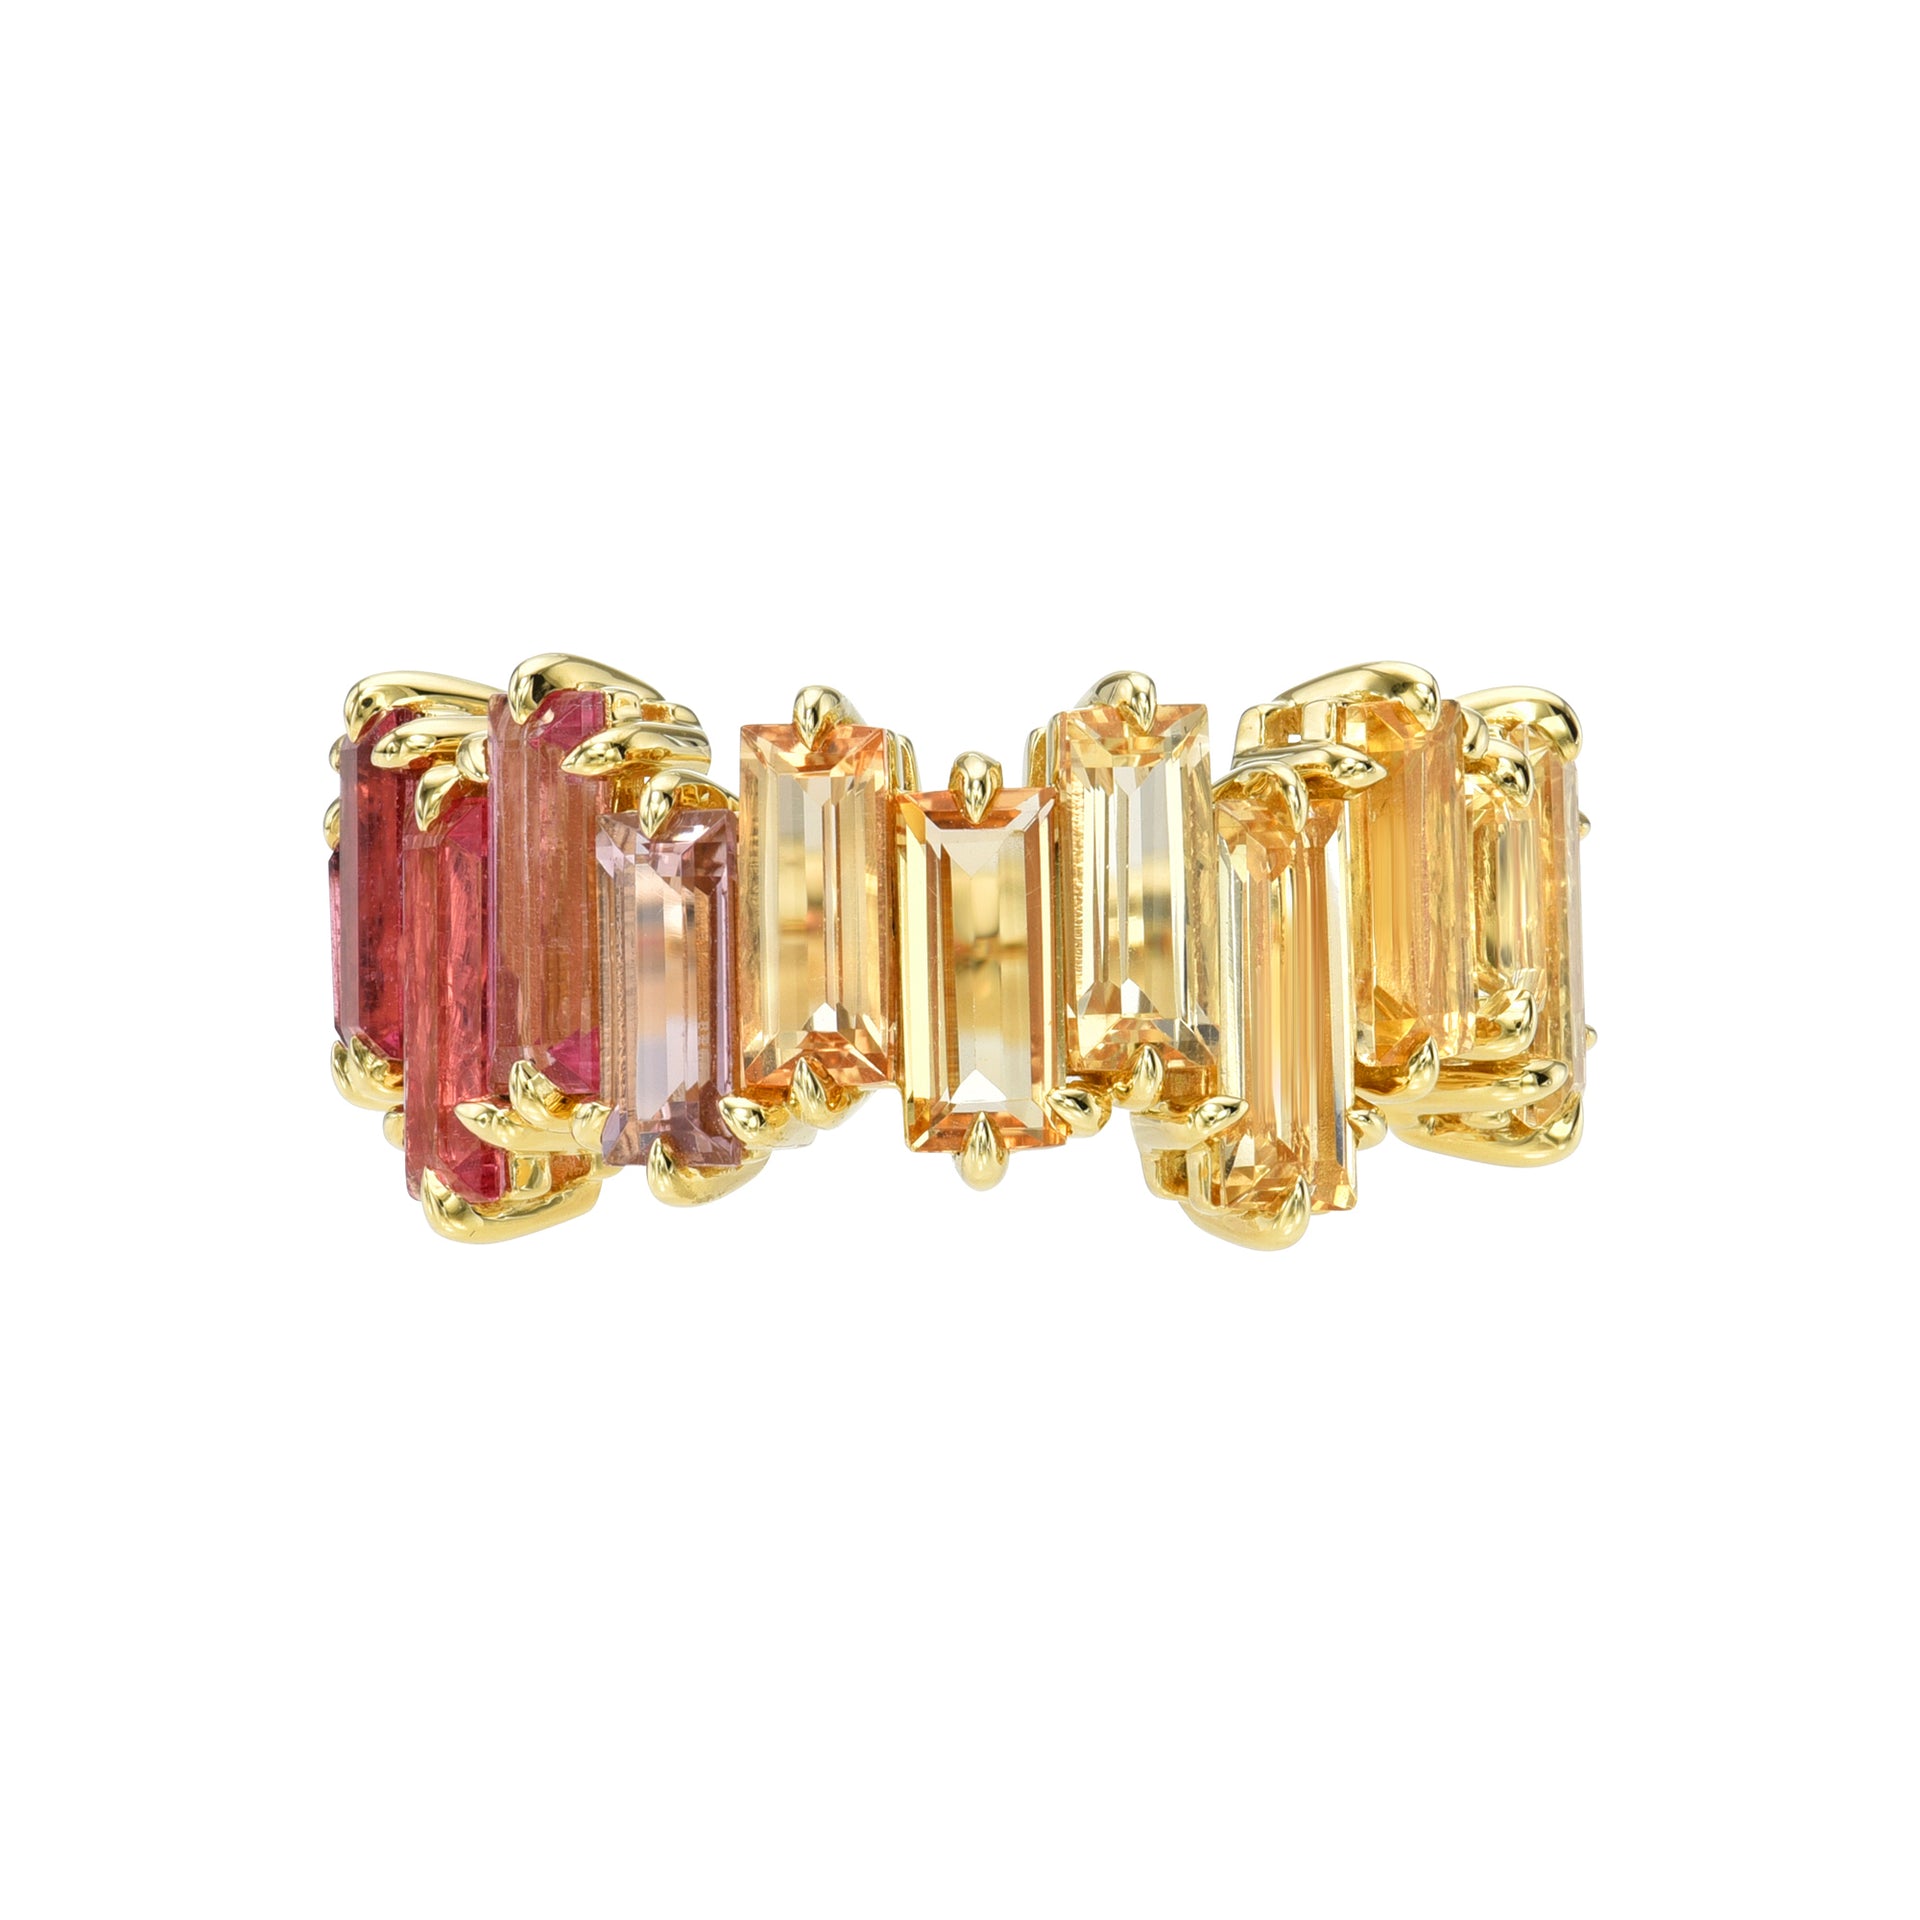 "Sunset Baguette" Ring - Meredith Young